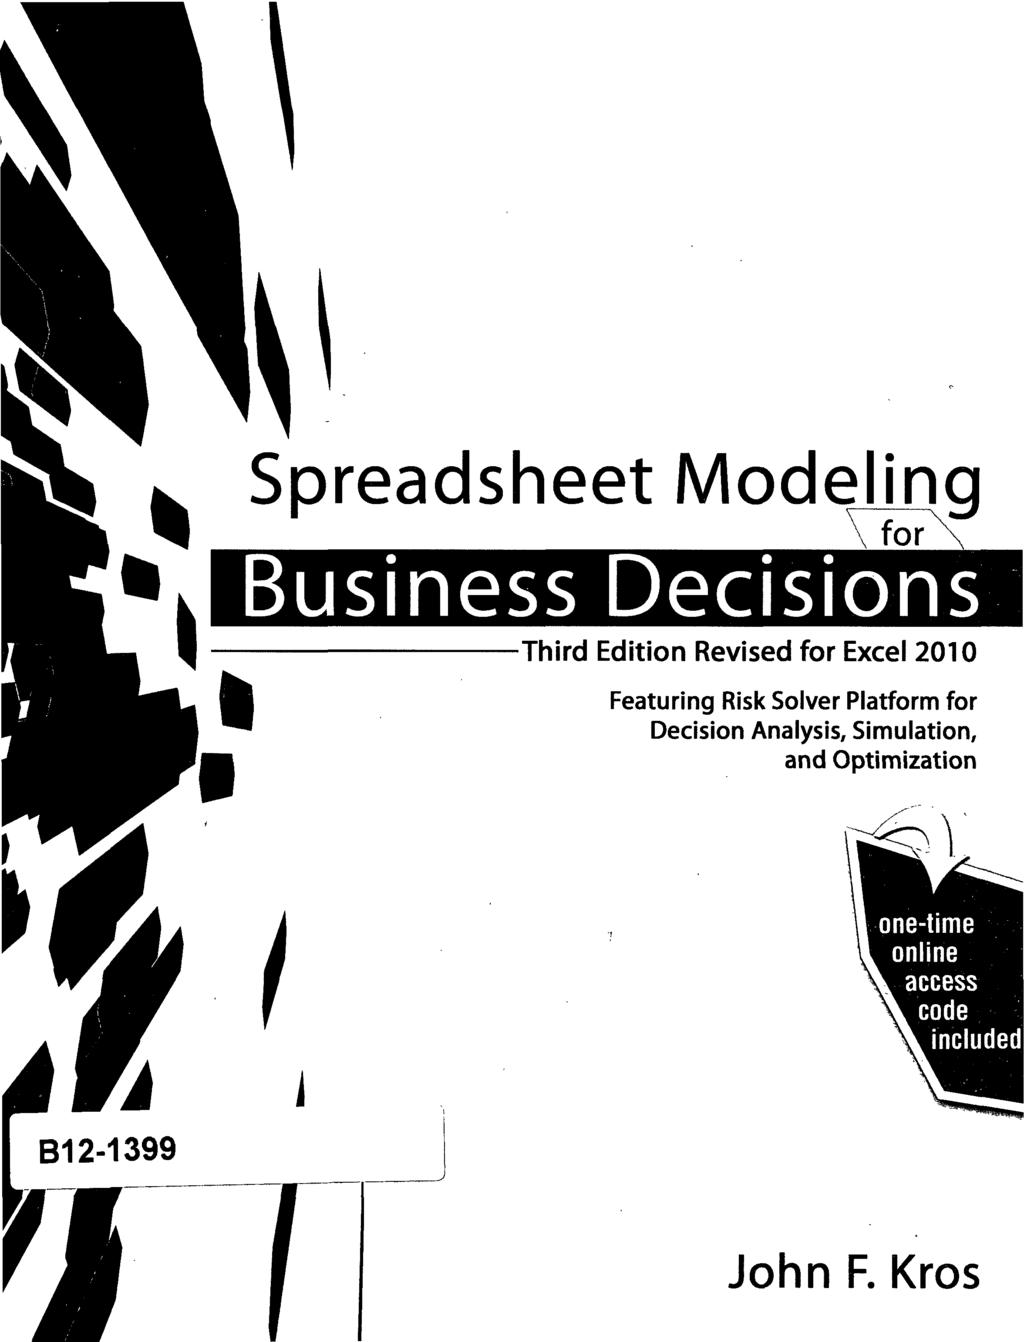 1 Spreadsheet Modeling Vfor\ Business Decisions Third Edition Revised for Excel 2010 Featuring